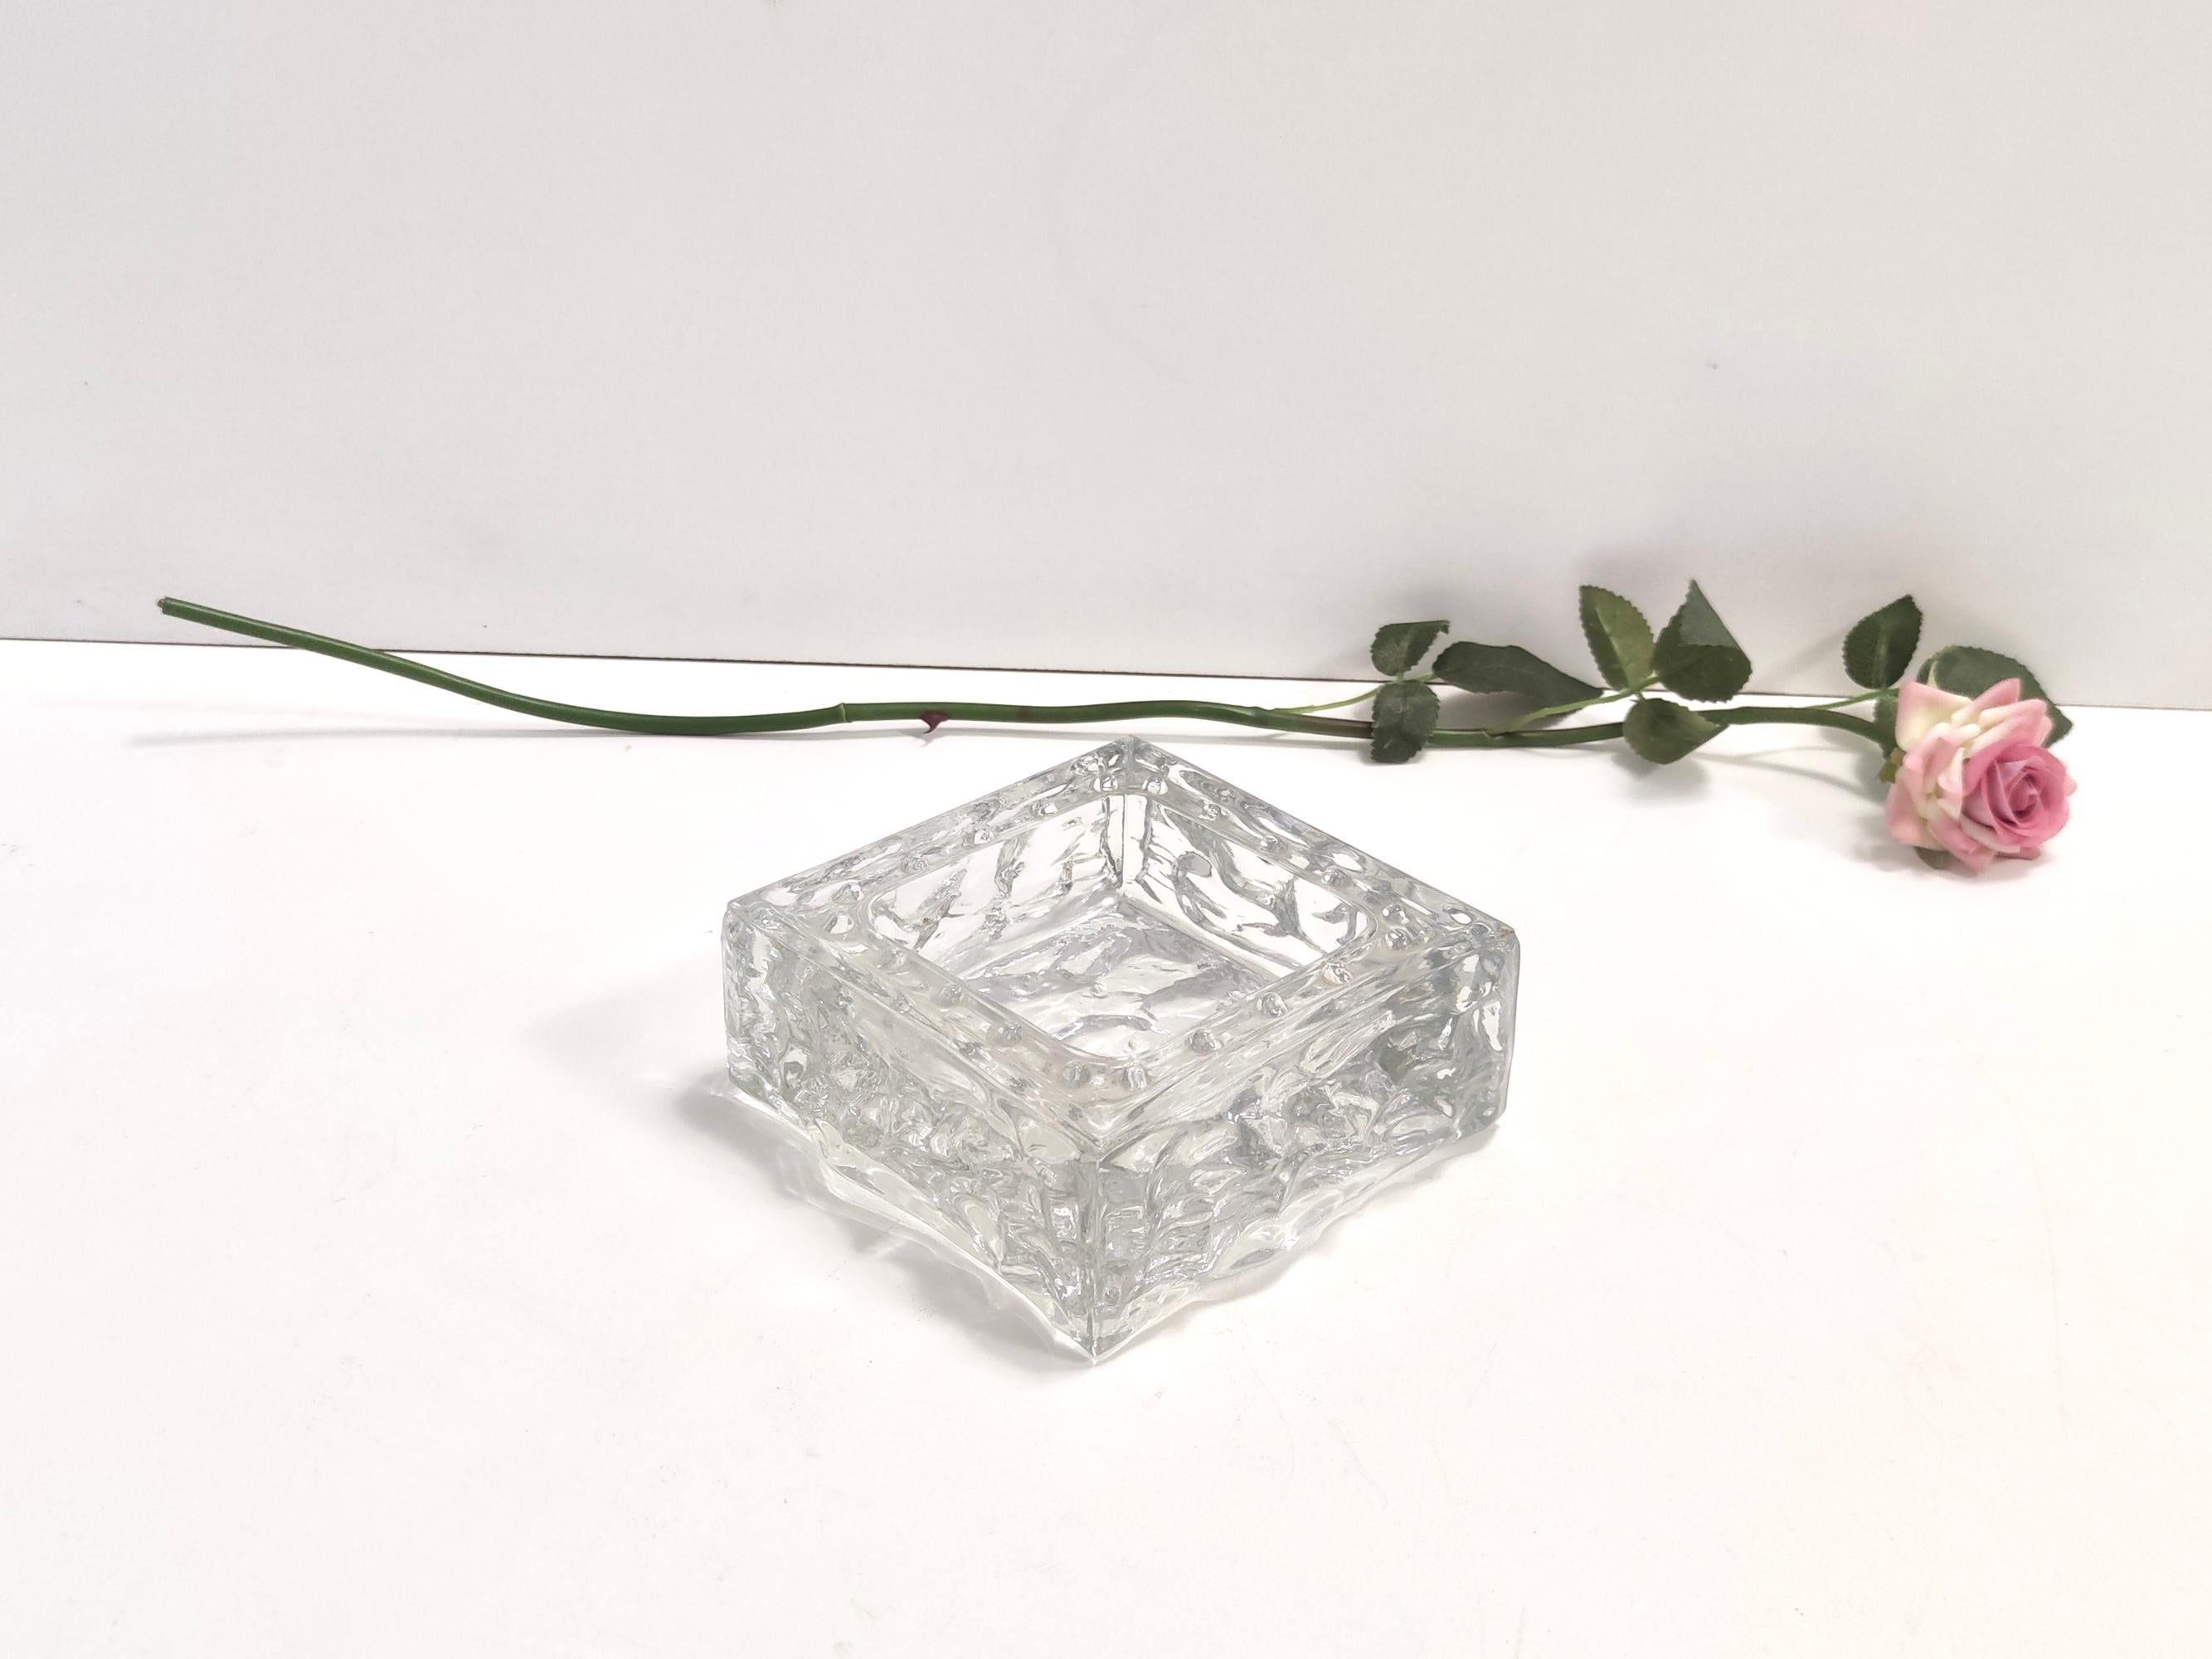 Made in Italy, 1968.
Made in thick molded glass. 
It is a vintage piece, therefore it might show slight traces of use, but it can be considered as in perfect original condition and ready to become a piece in a home. 

Measures: 
Width: 15 cm 
Depth: